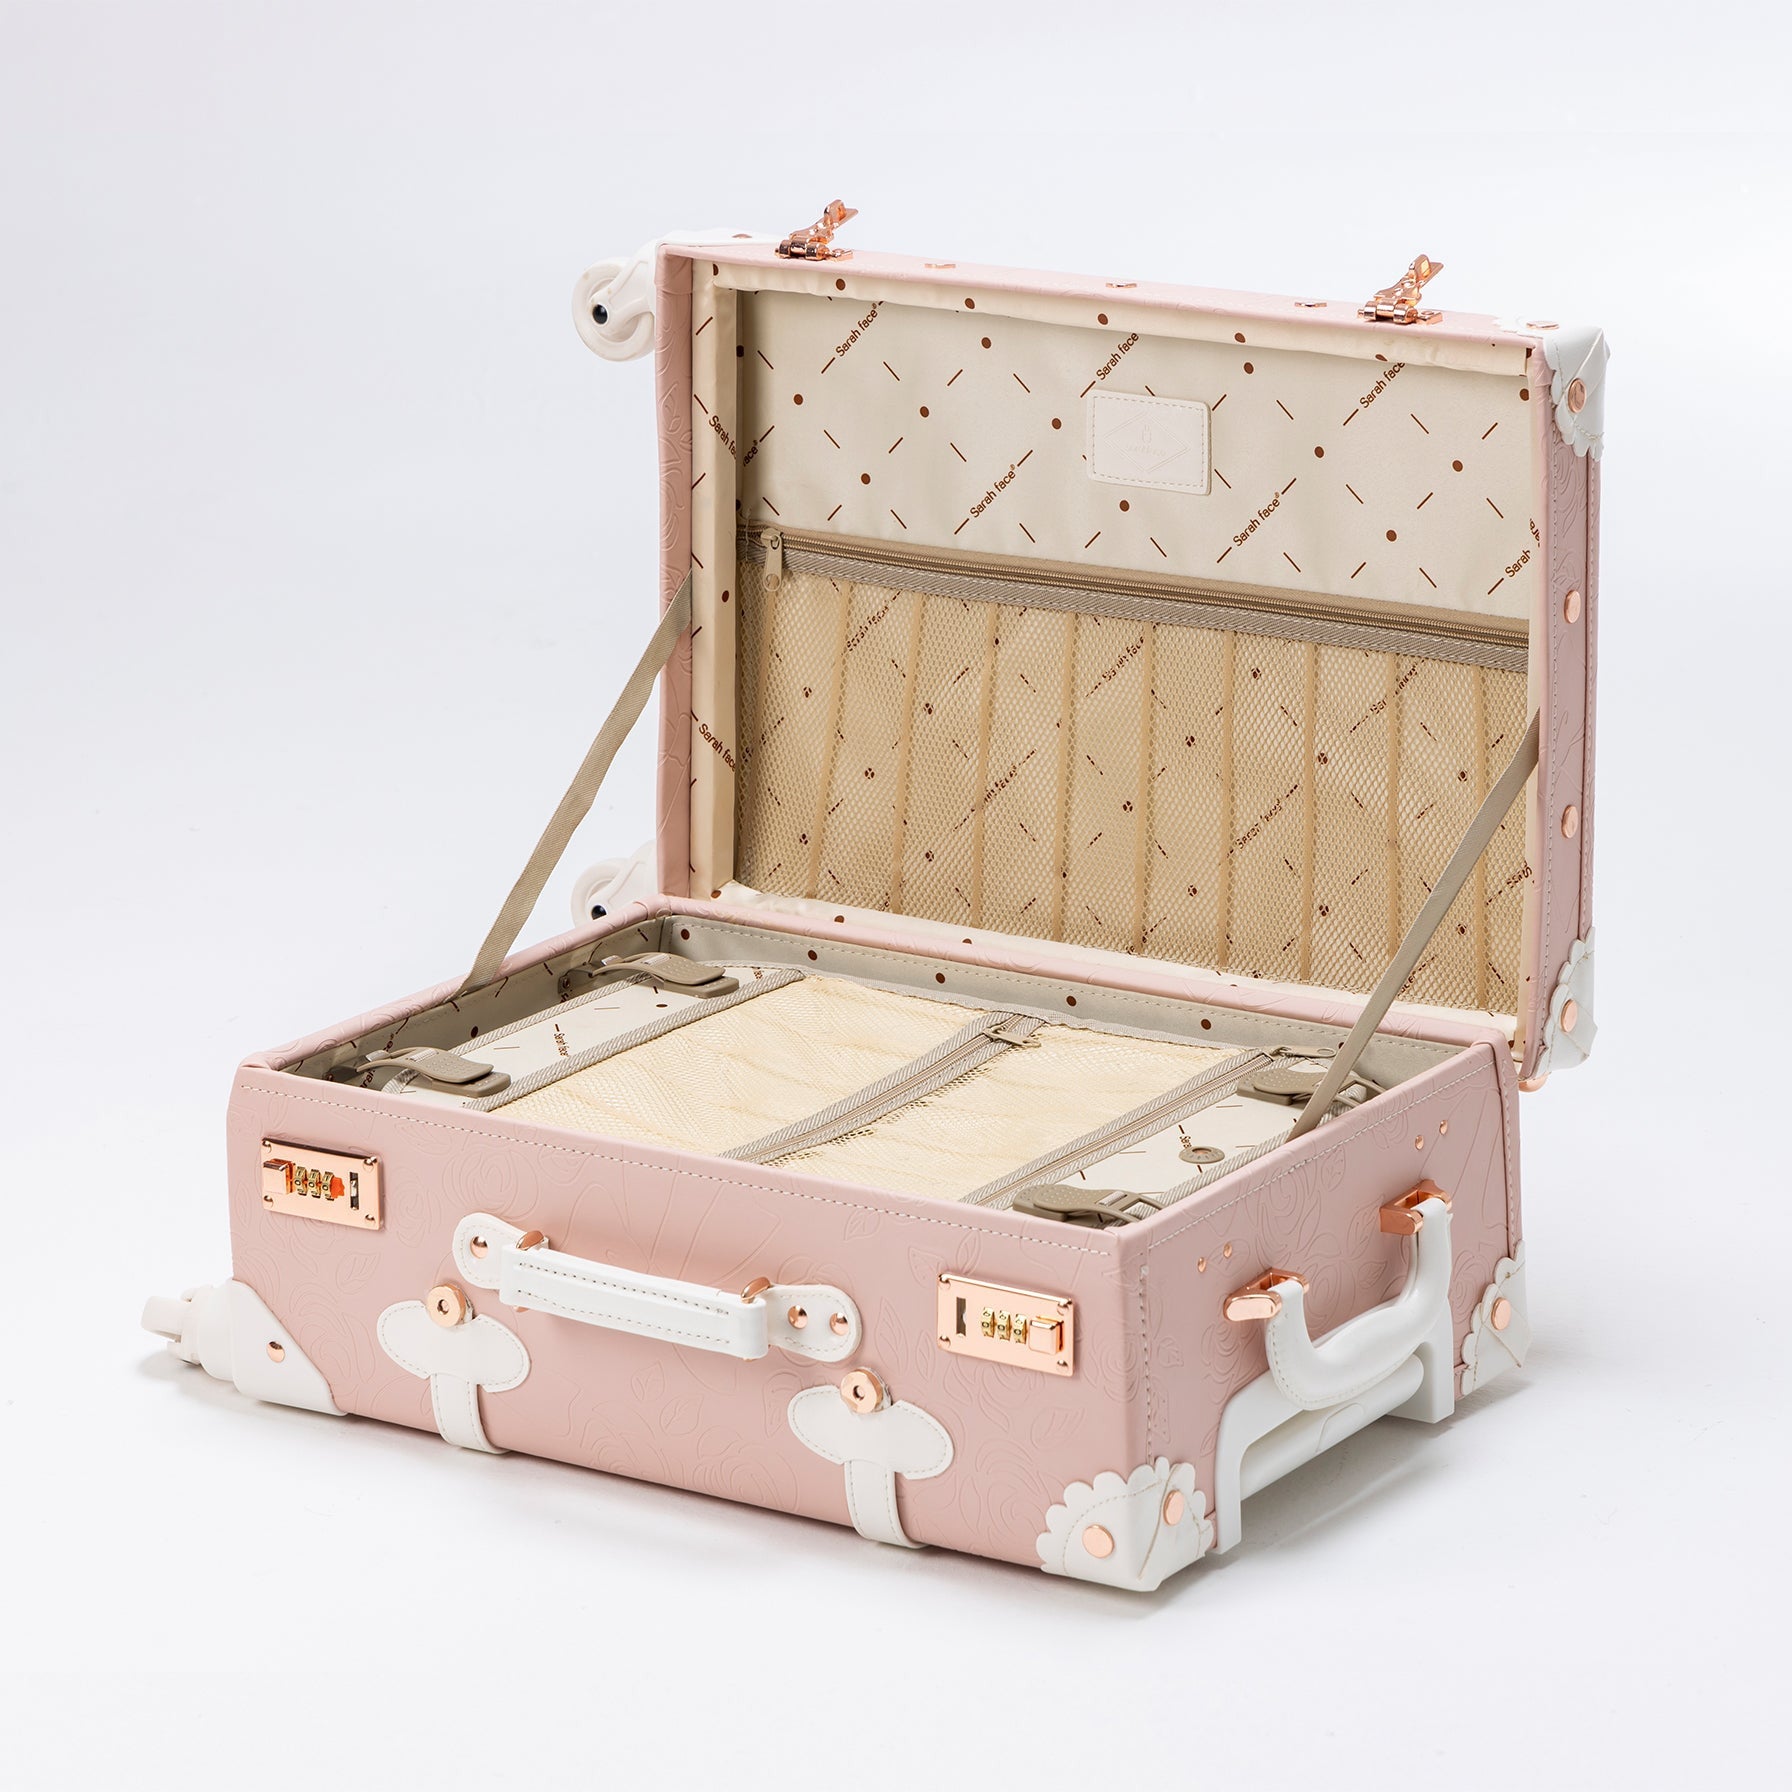 SarahFace 2 Pieces Luggage Set - Embossed Pink's